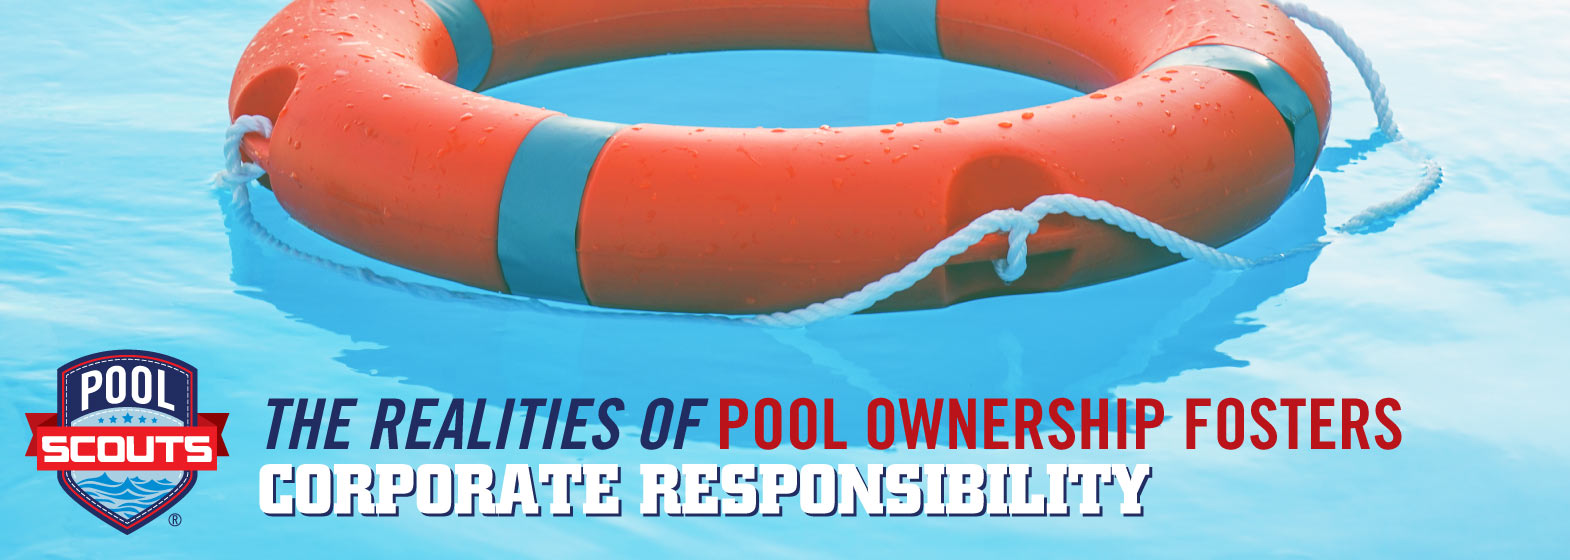 Image of How the Realities of Pool Ownership Fosters Corporate Responsibility